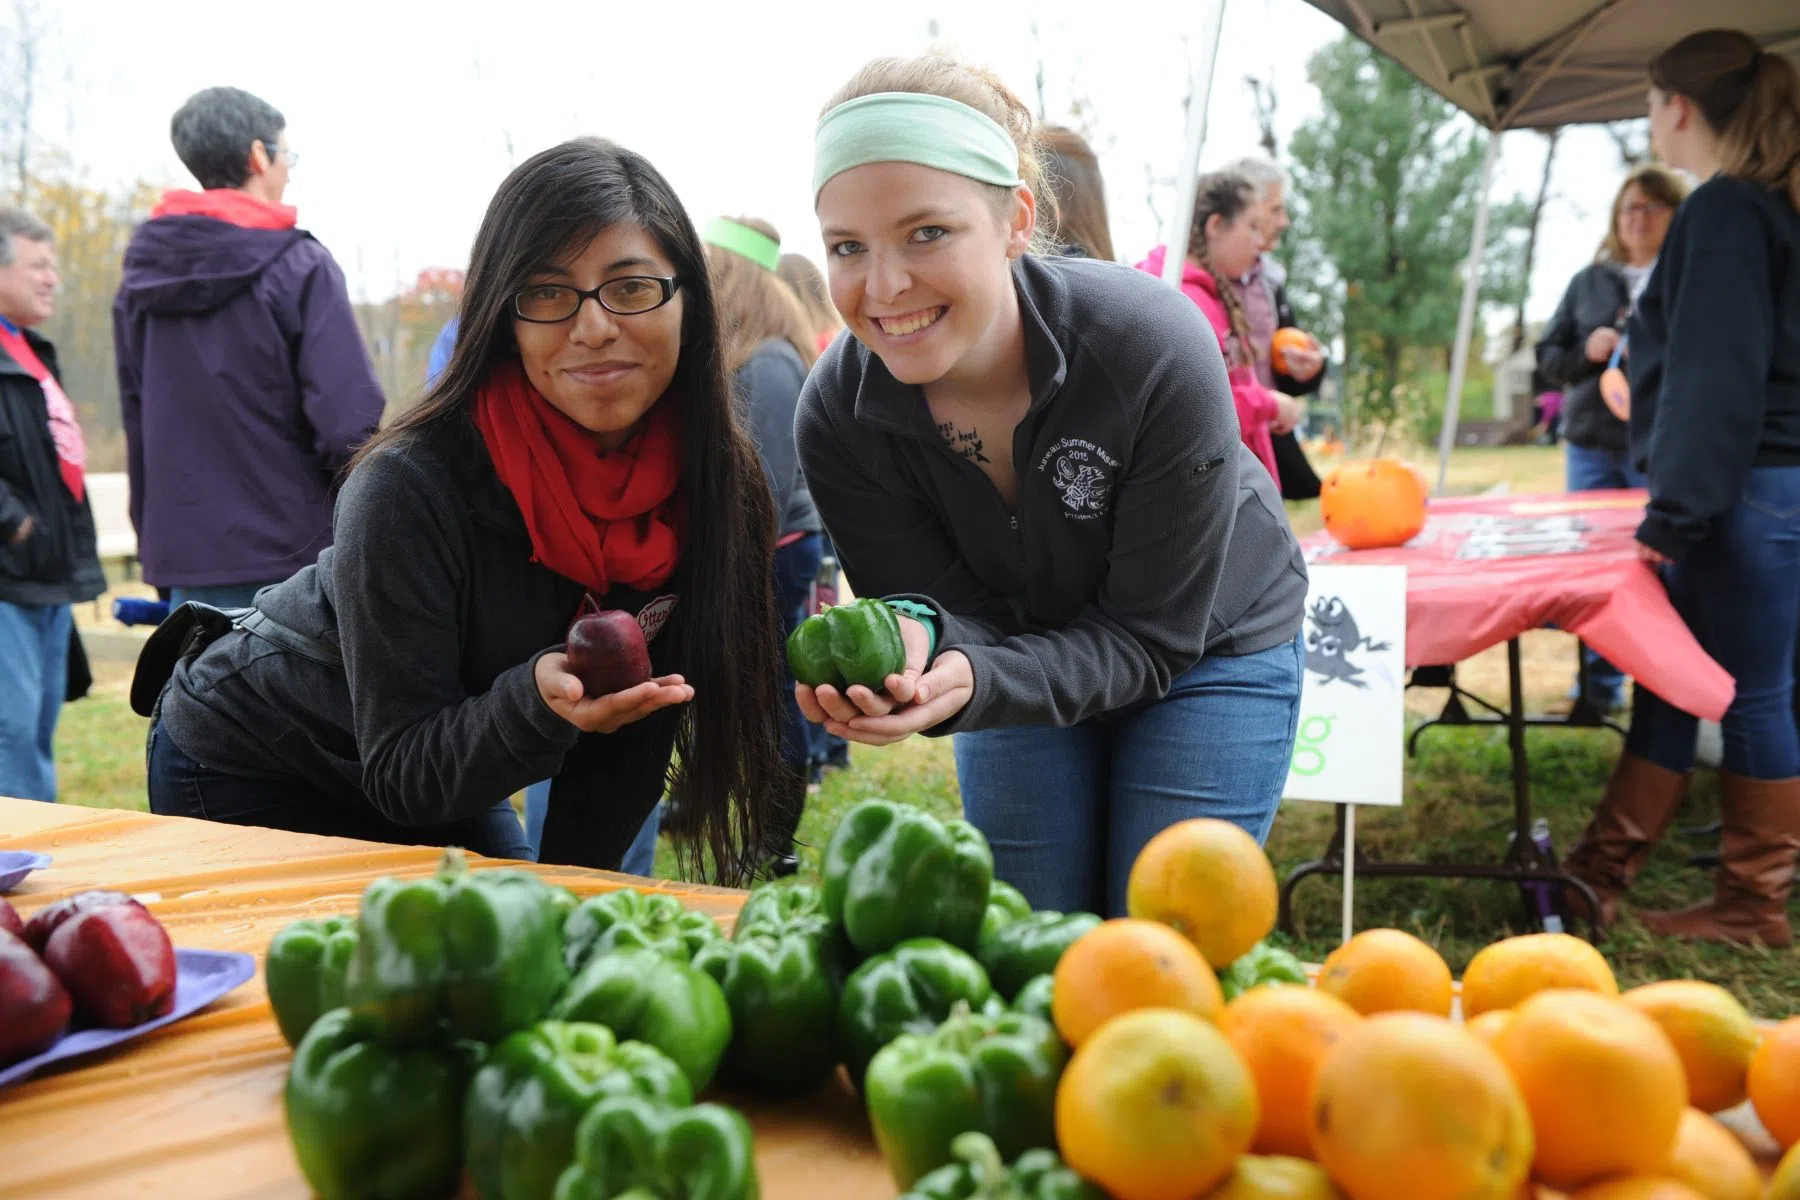 Student volunteers show produce from the Community Garden.